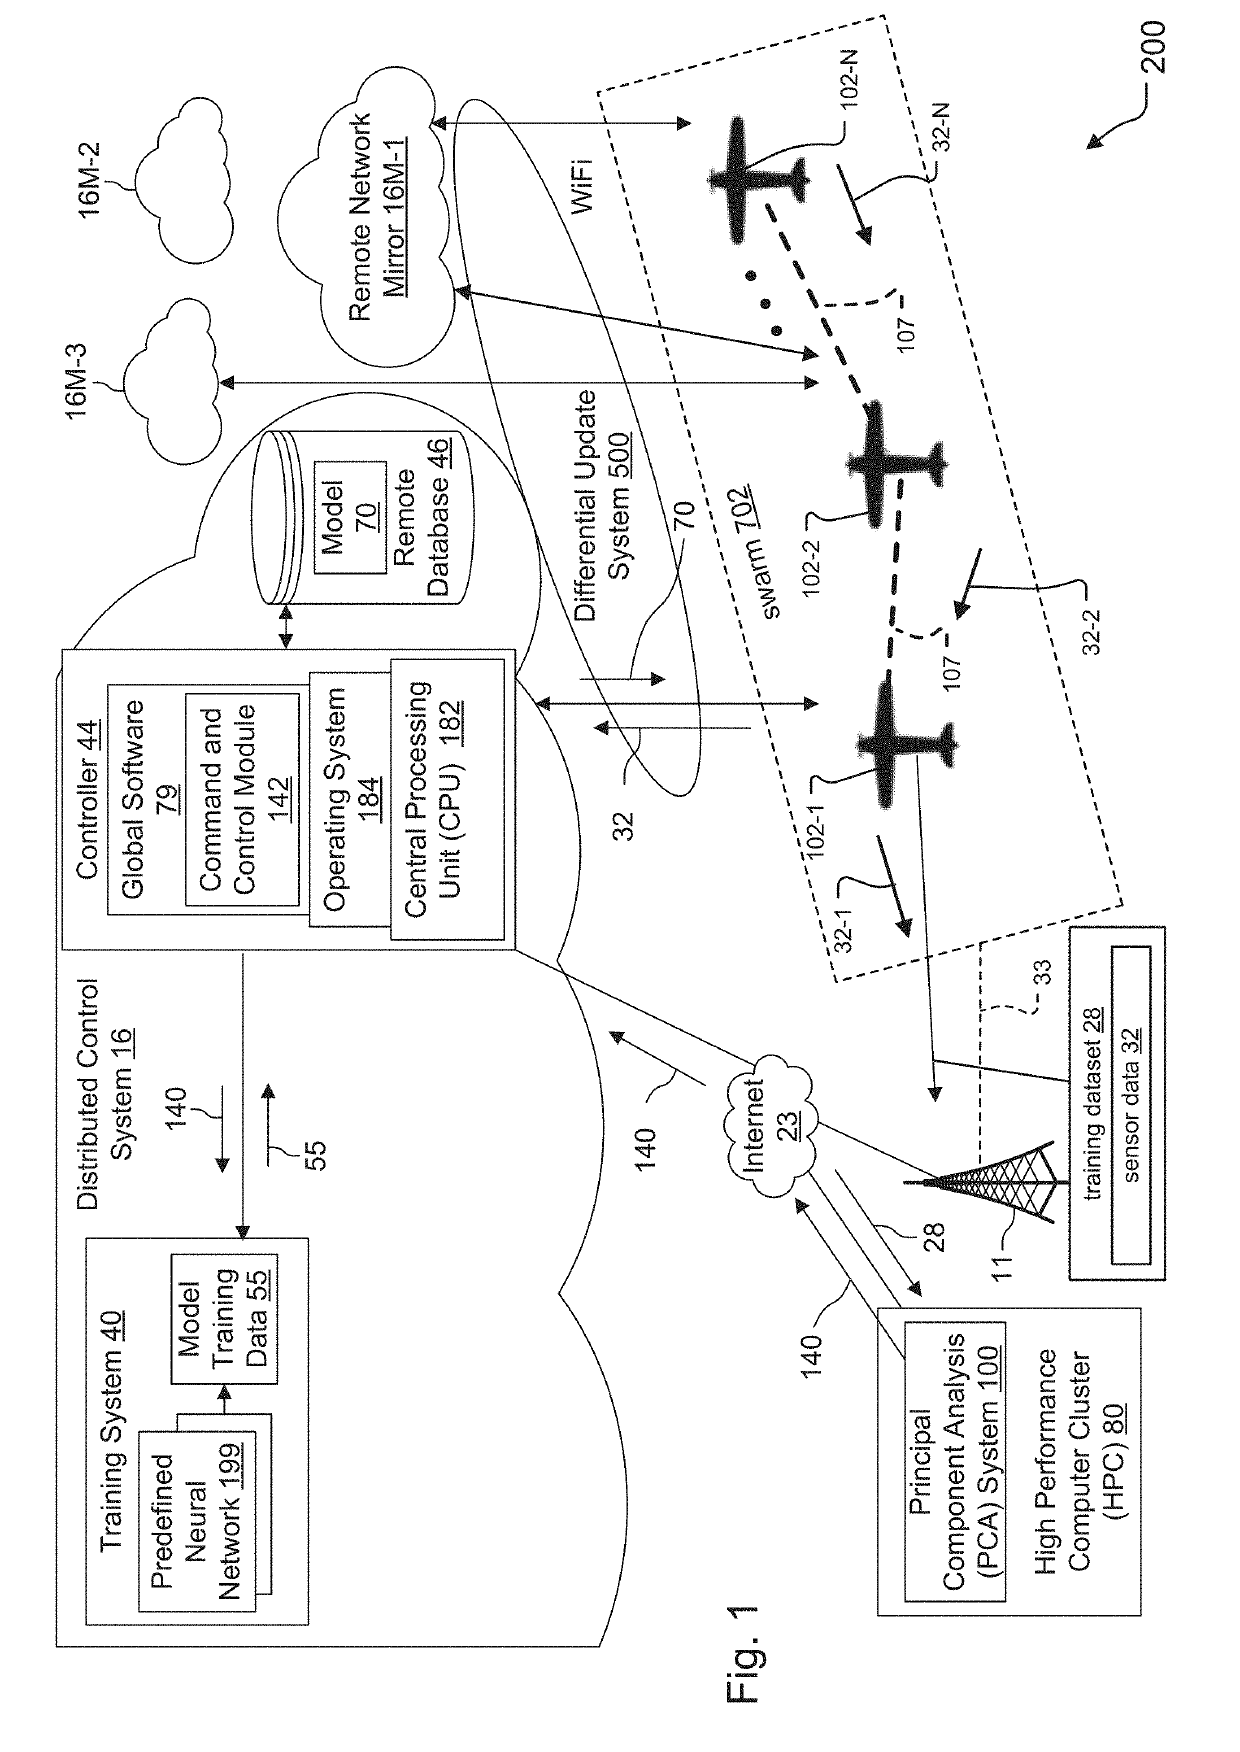 Distributed system for management and control of aerial vehicle air traffic